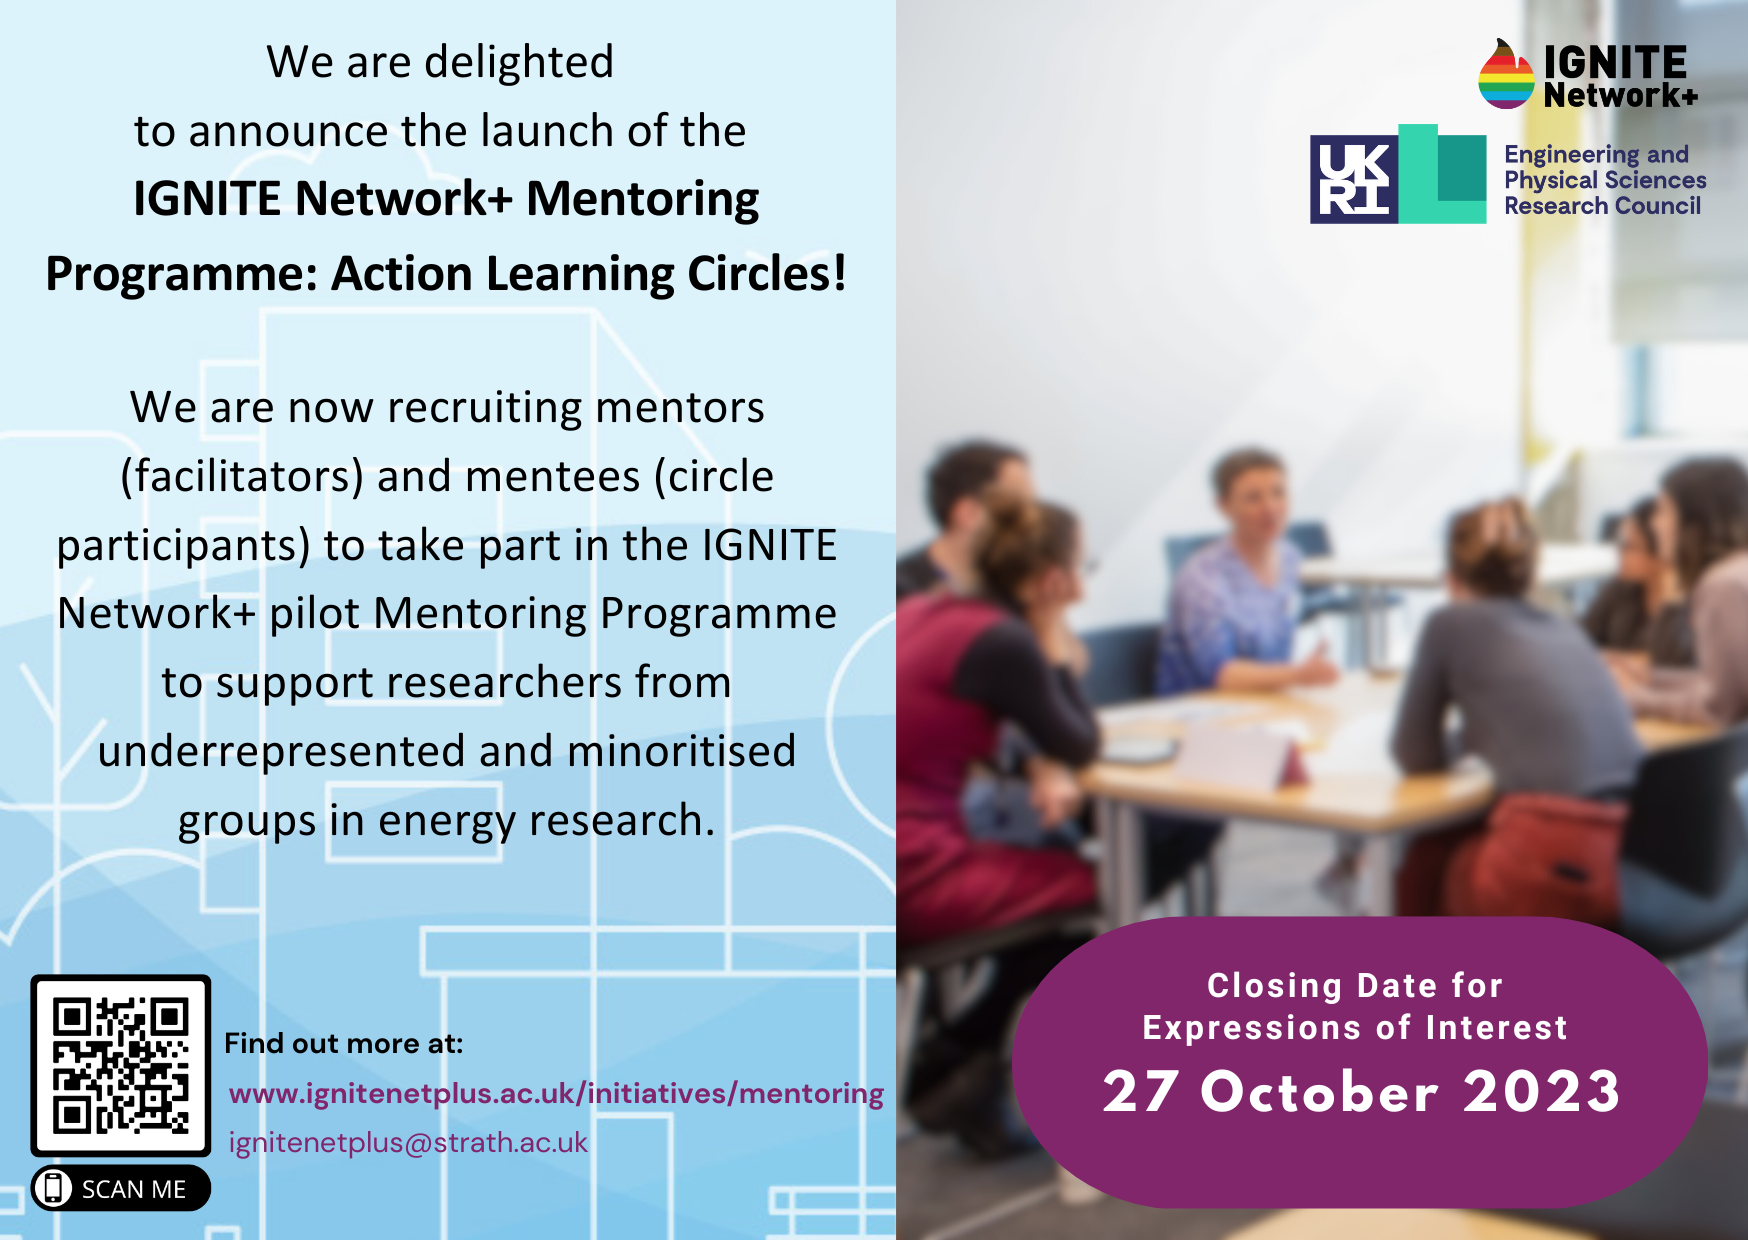 We are delighted to announce the launcg of the IGNITE menotring Programme: Action Learning Circles!  We are recruiting mentors (facilitators) and mentees (circle particiapnts) to take part in the IGNITE Network pilot Mentoring Programme to support researchers from underrepresented and minoritised groups in energy research.  Closing Date for Expressions of Interest 27 October 2023. More information at wwww.ignitenetplus.ac.uk/initiatives/mentoring